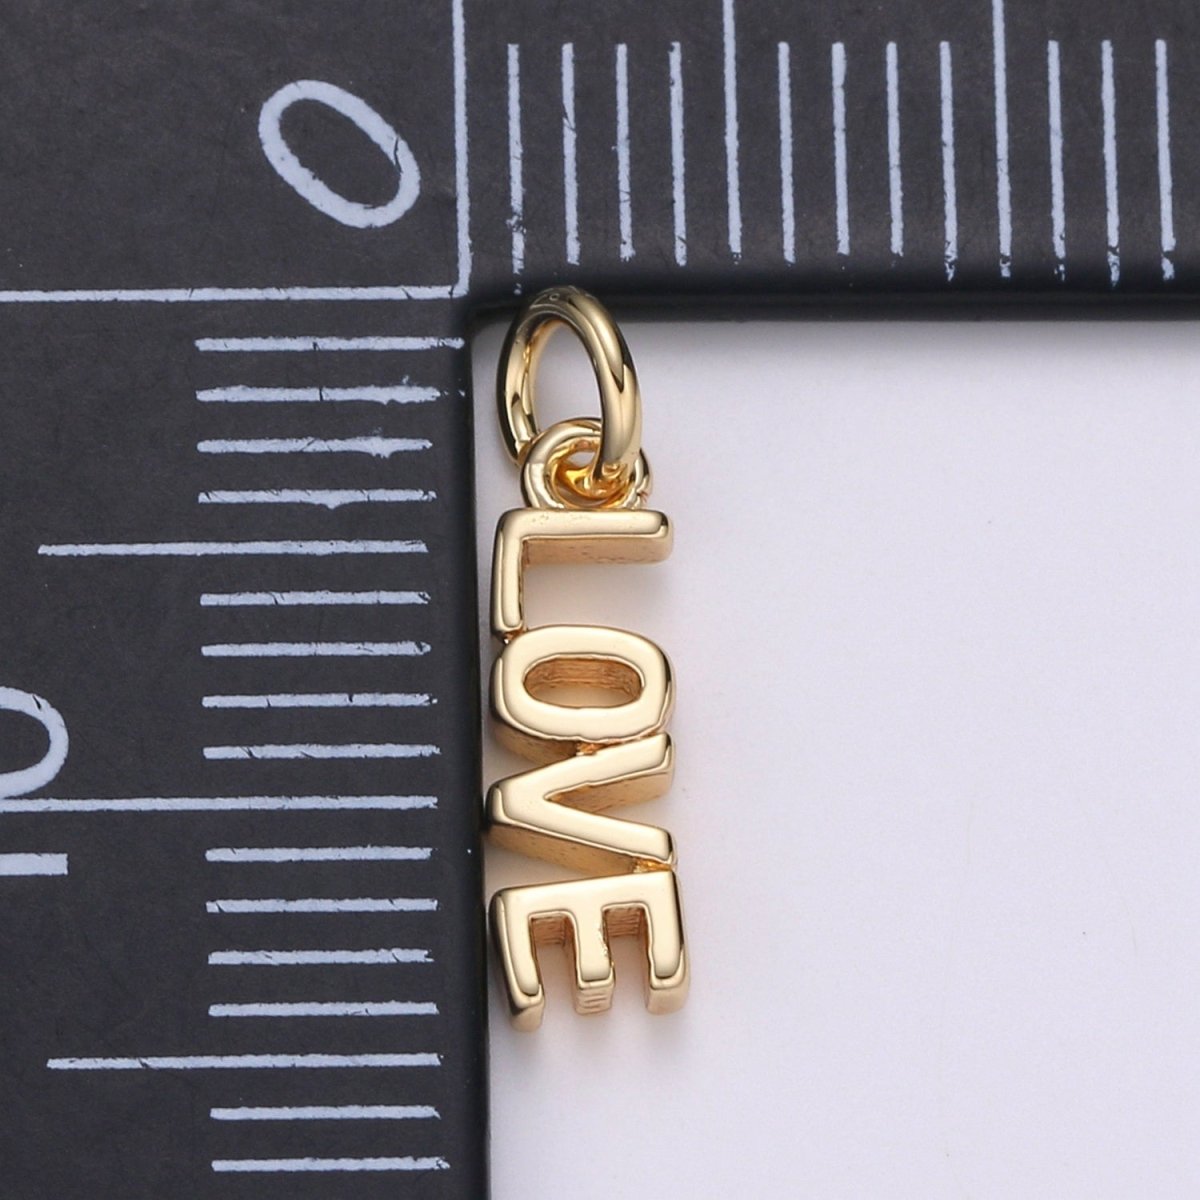 Dainty Love Charm 18k Gold Filled Love Script Words Charm for Bracelet Necklace Earring Component Diy Jewelry Making Supply E-141 - DLUXCA